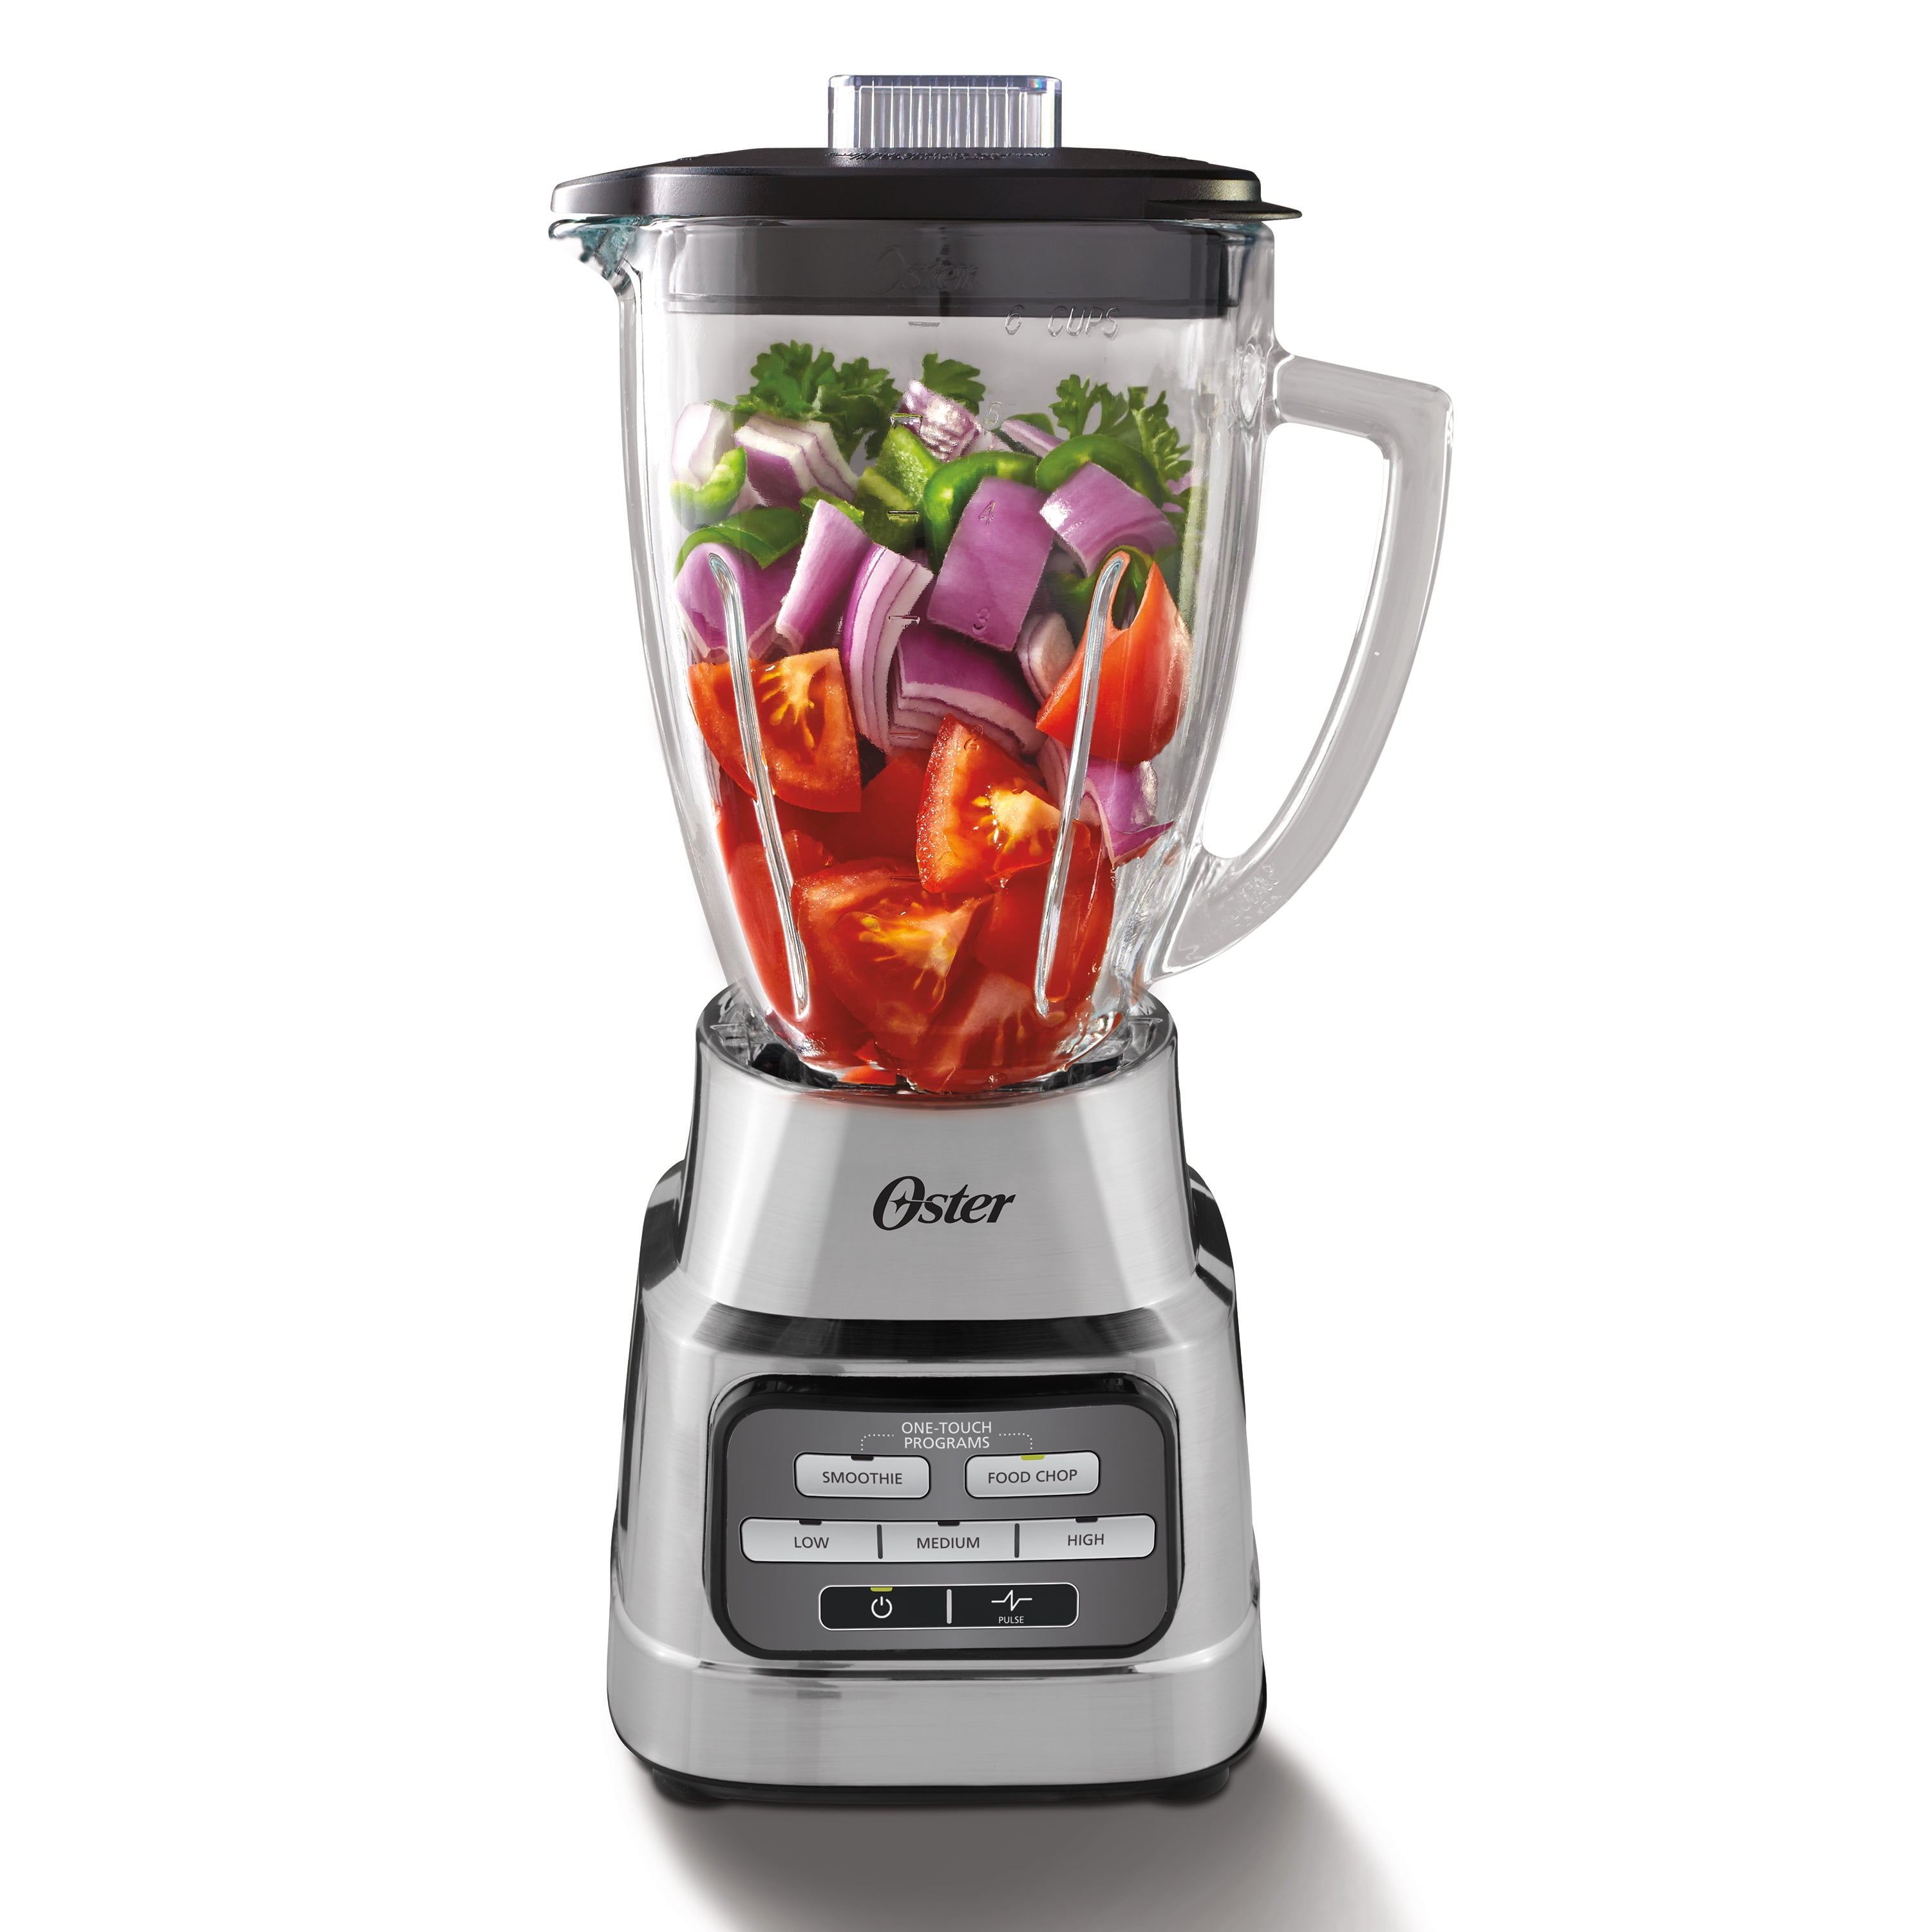 Oster 3 in 1 Blender And Food Processor System With 1200 Watt Motor And 